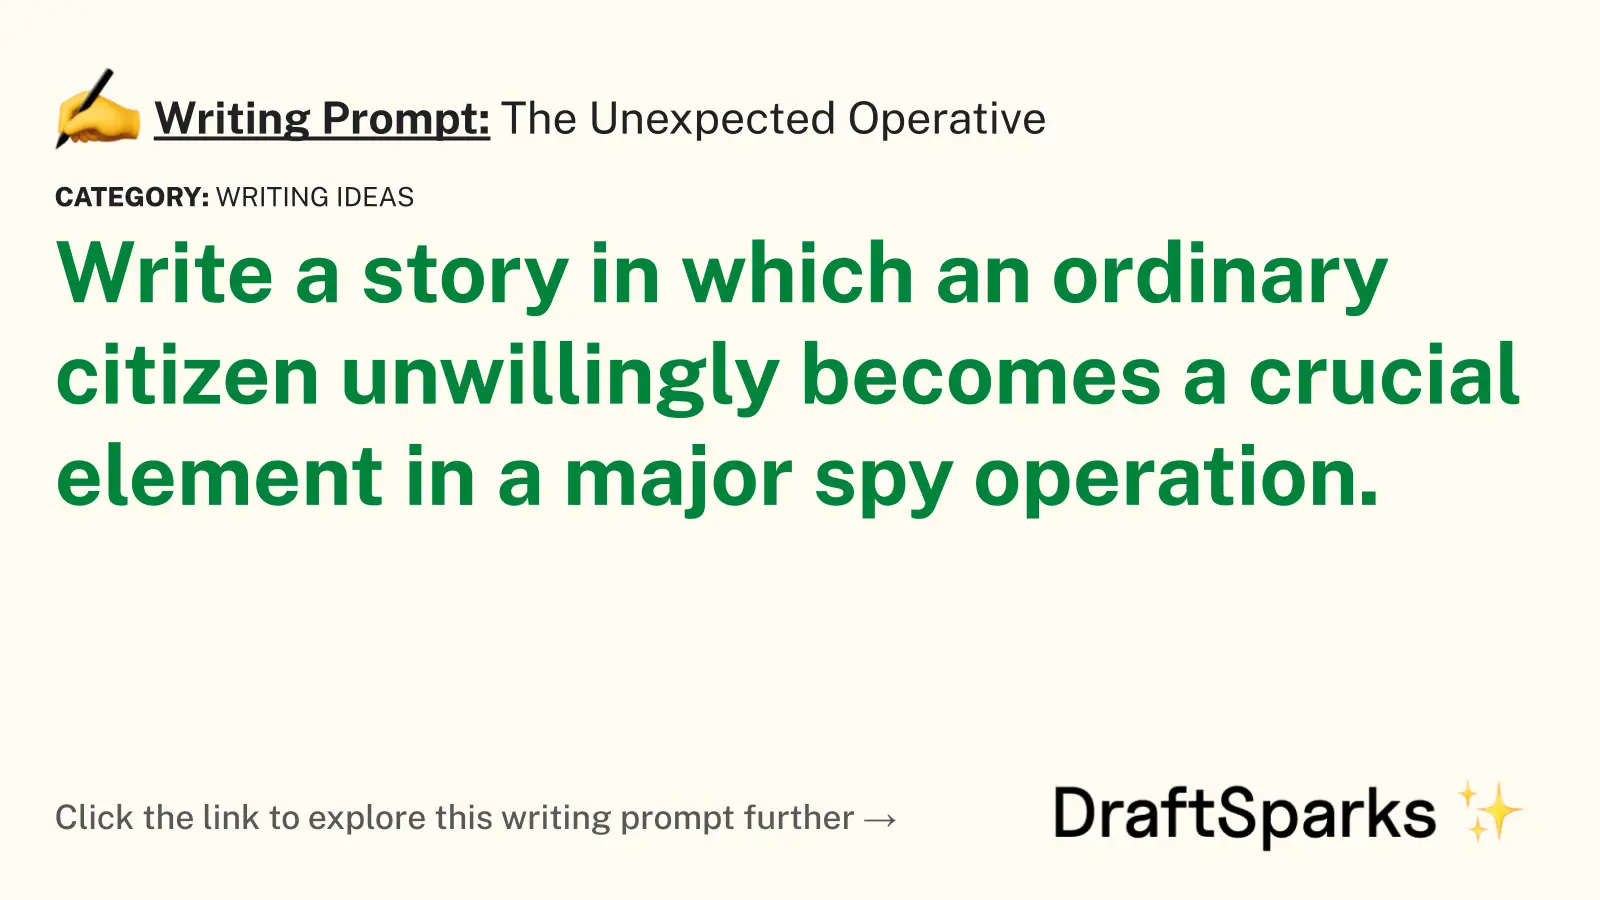 The Unexpected Operative